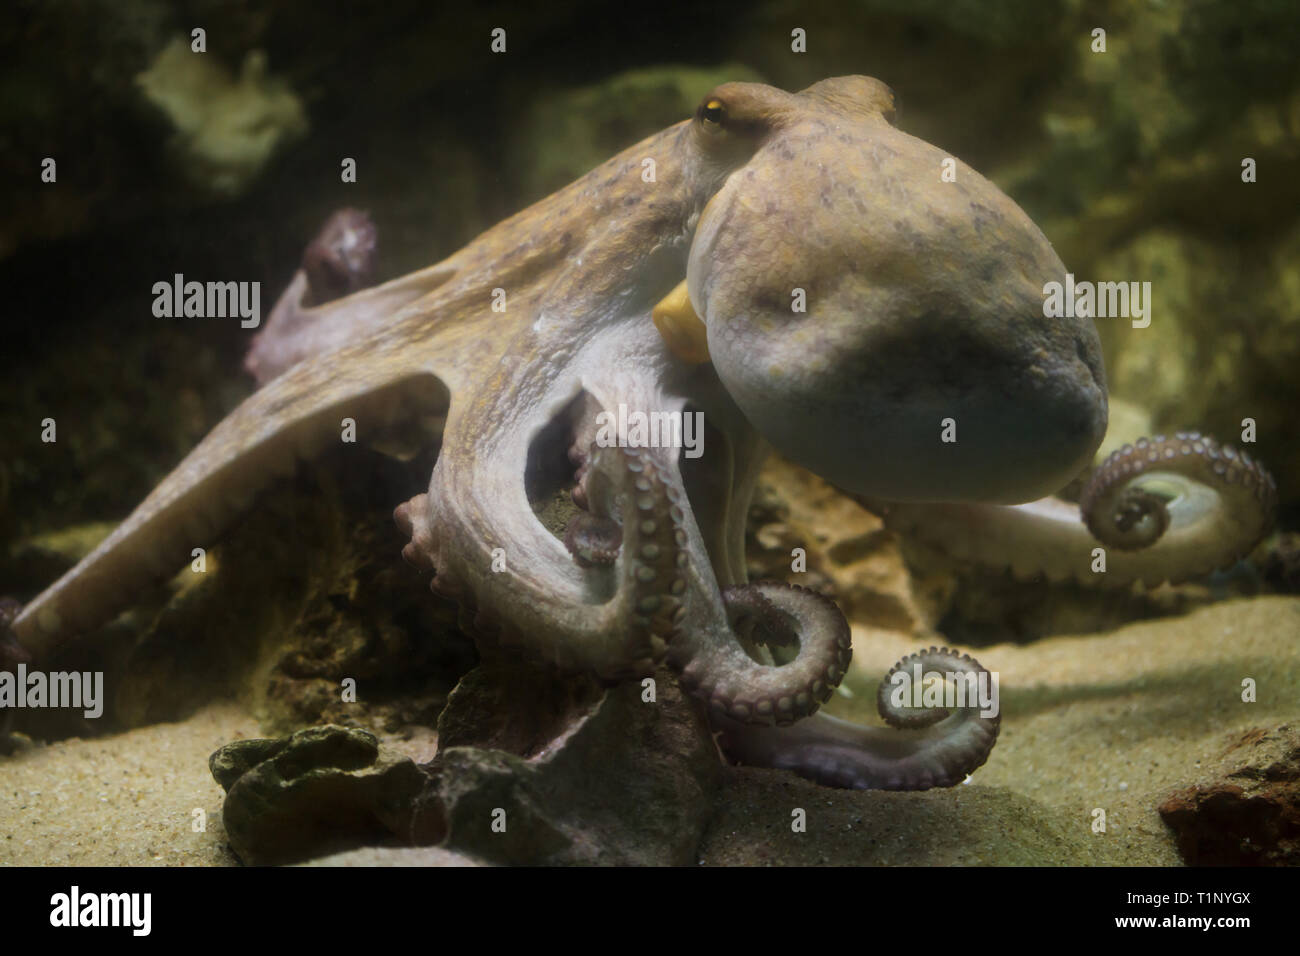 Common octopus (Octopus vulgaris), also known as the octopus. Stock Photo